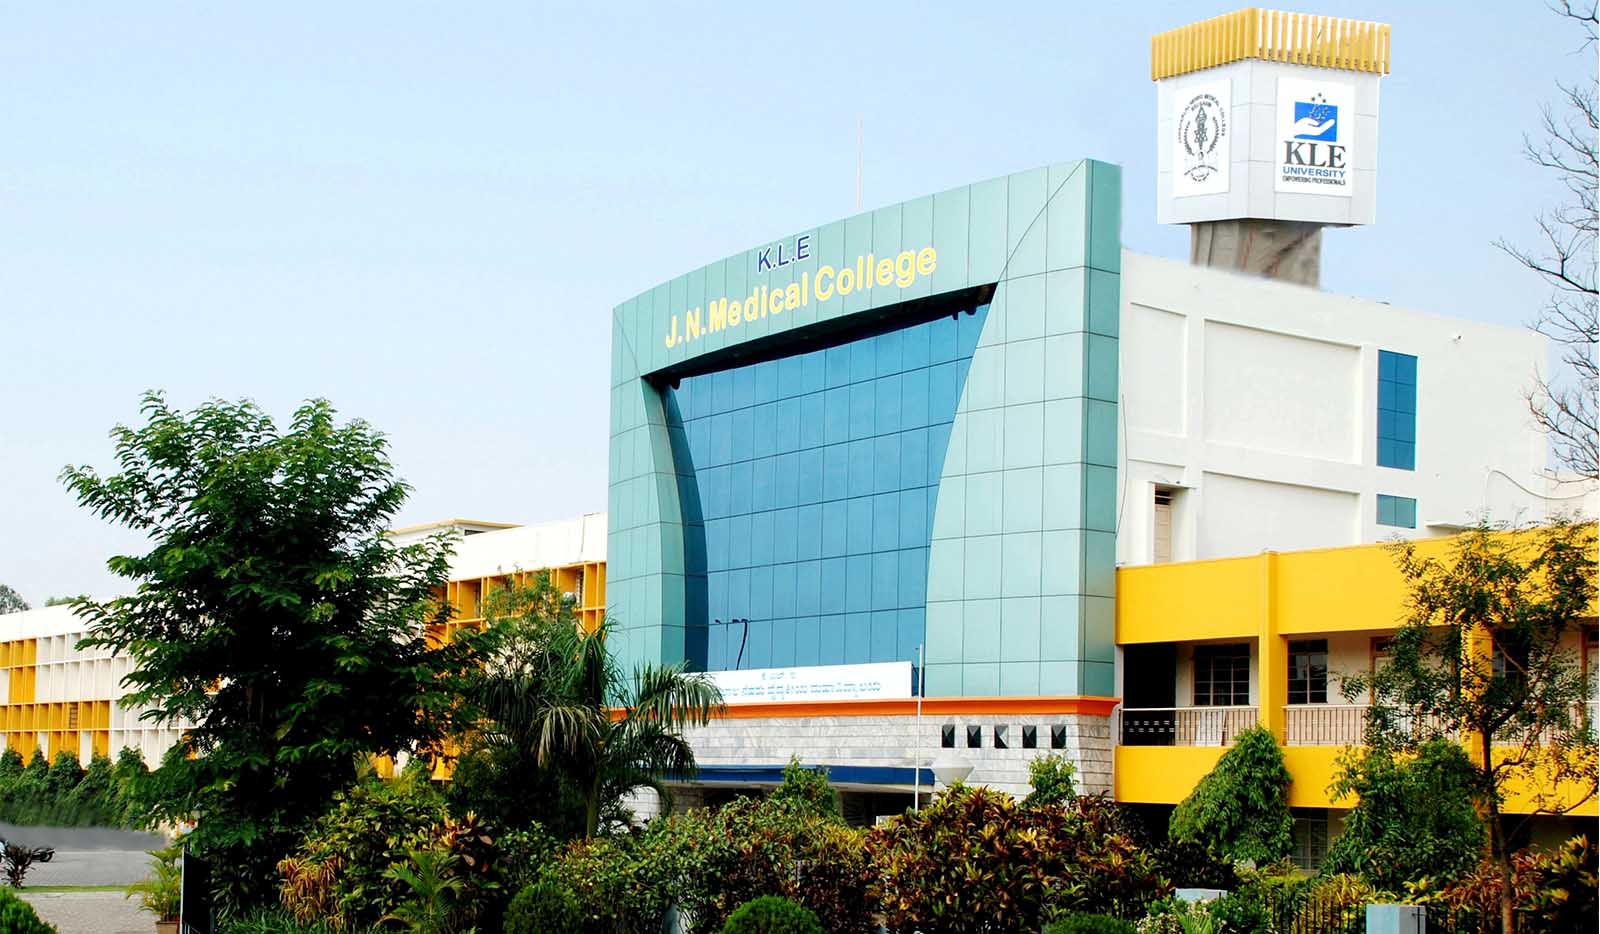 Jawaharlal Nehru Medical College Belgaum Admission, Fee Structure, Courses Offered, On Campus Facilities, Recognition